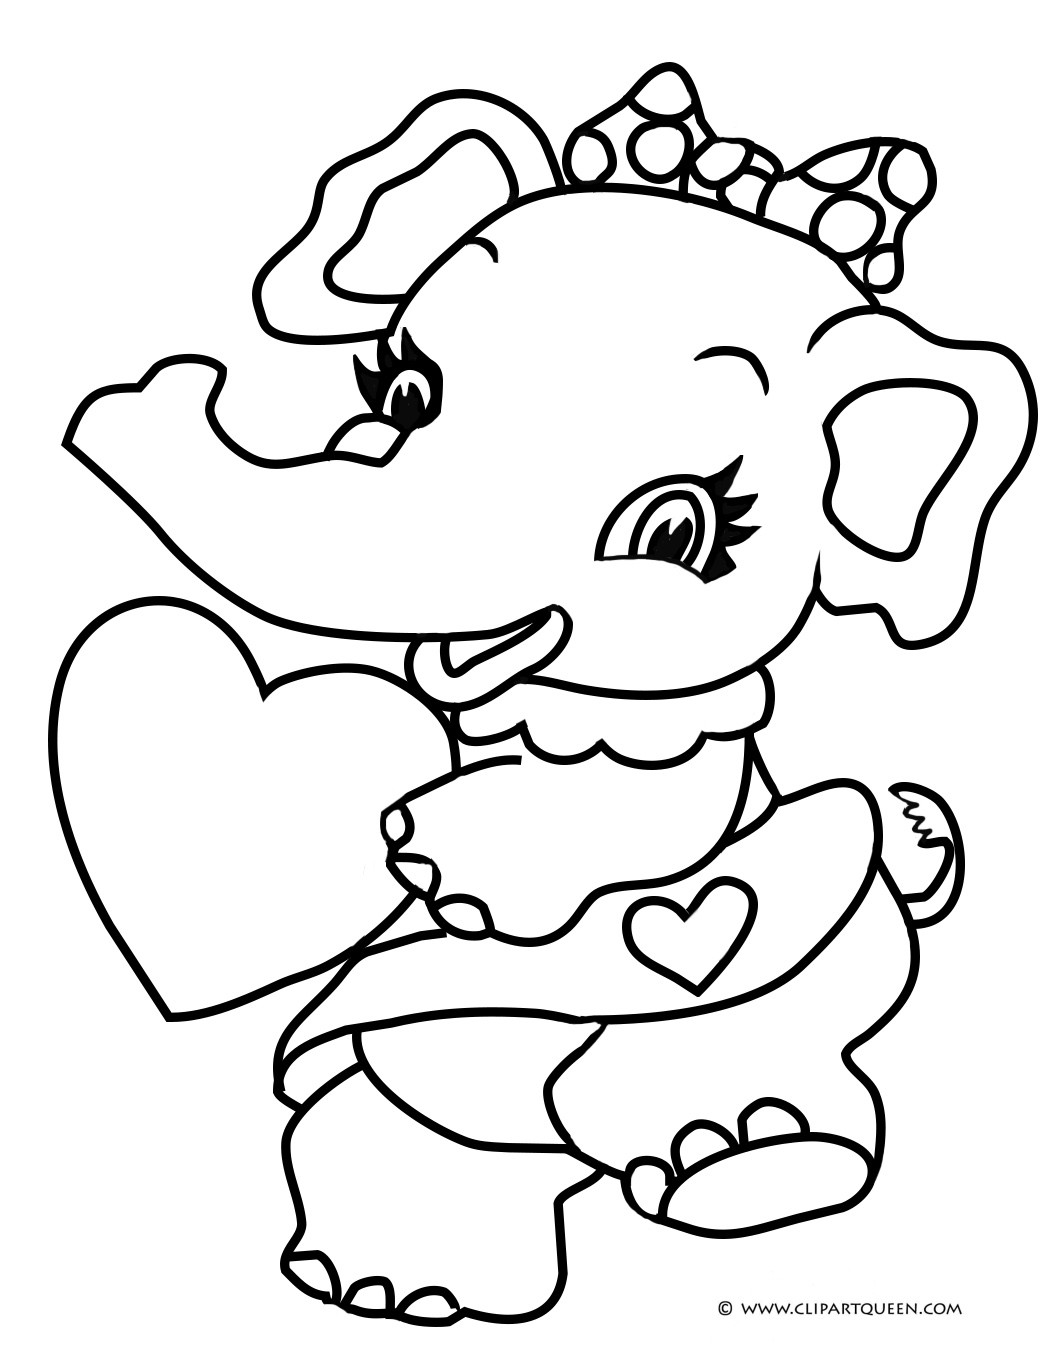 Valentines Coloring Pages For Kids
 15 Valentine s Day coloring pages